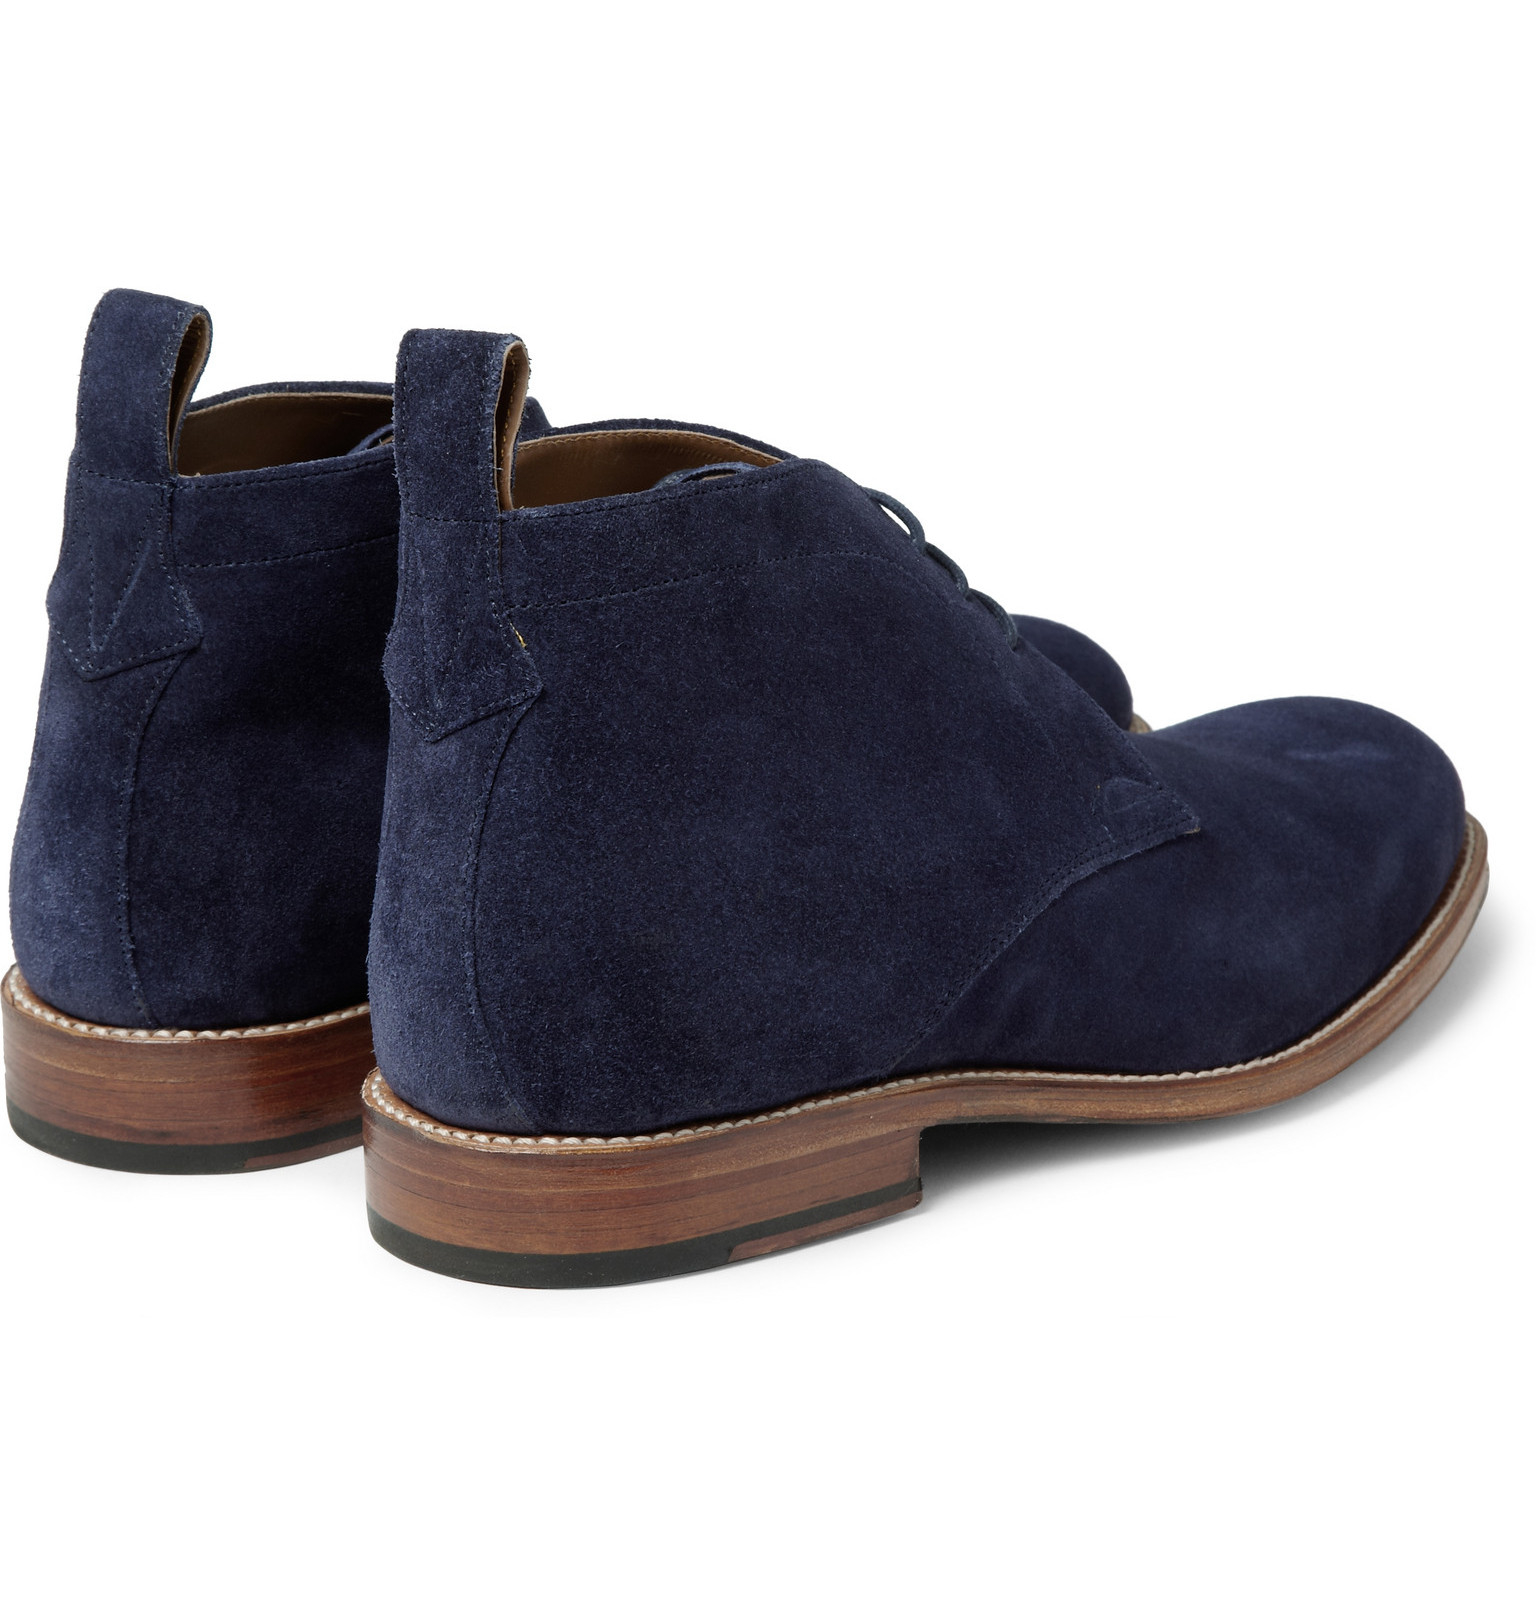 Lyst - Grenson Marcus Suede Chukka Boots in Blue for Men